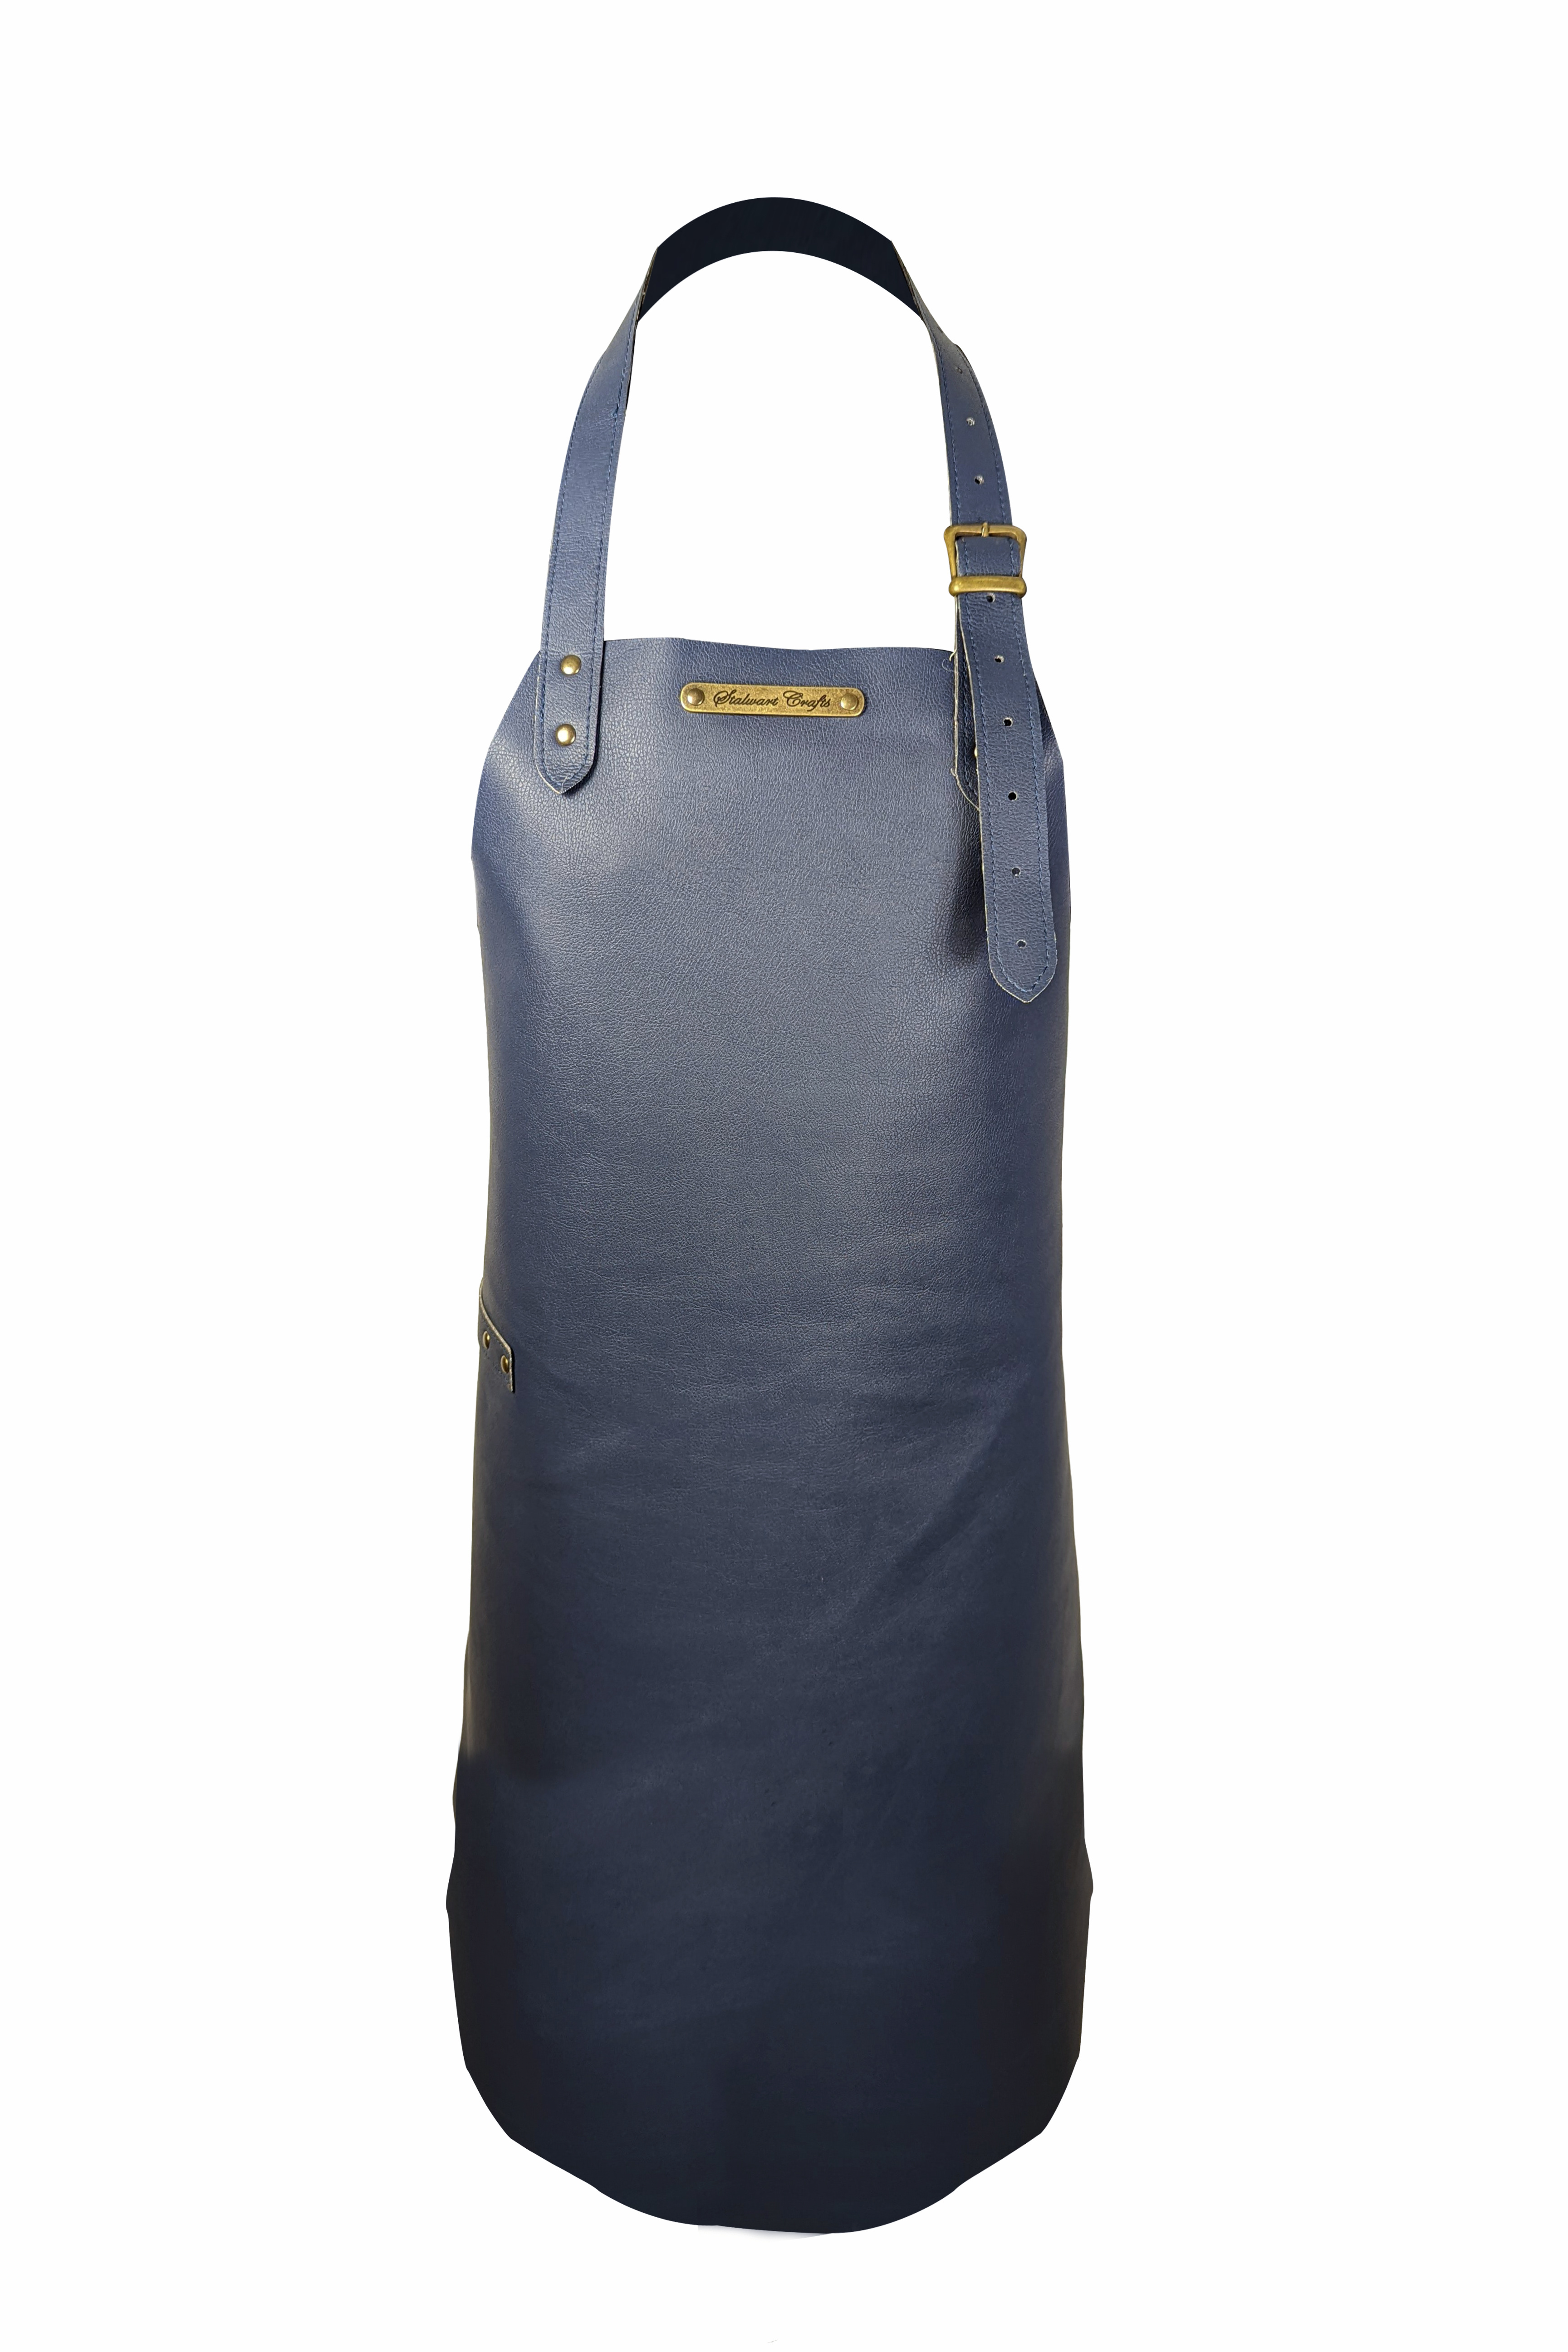 NEW COLLECTION – Vegan aprons made from Apple leather!